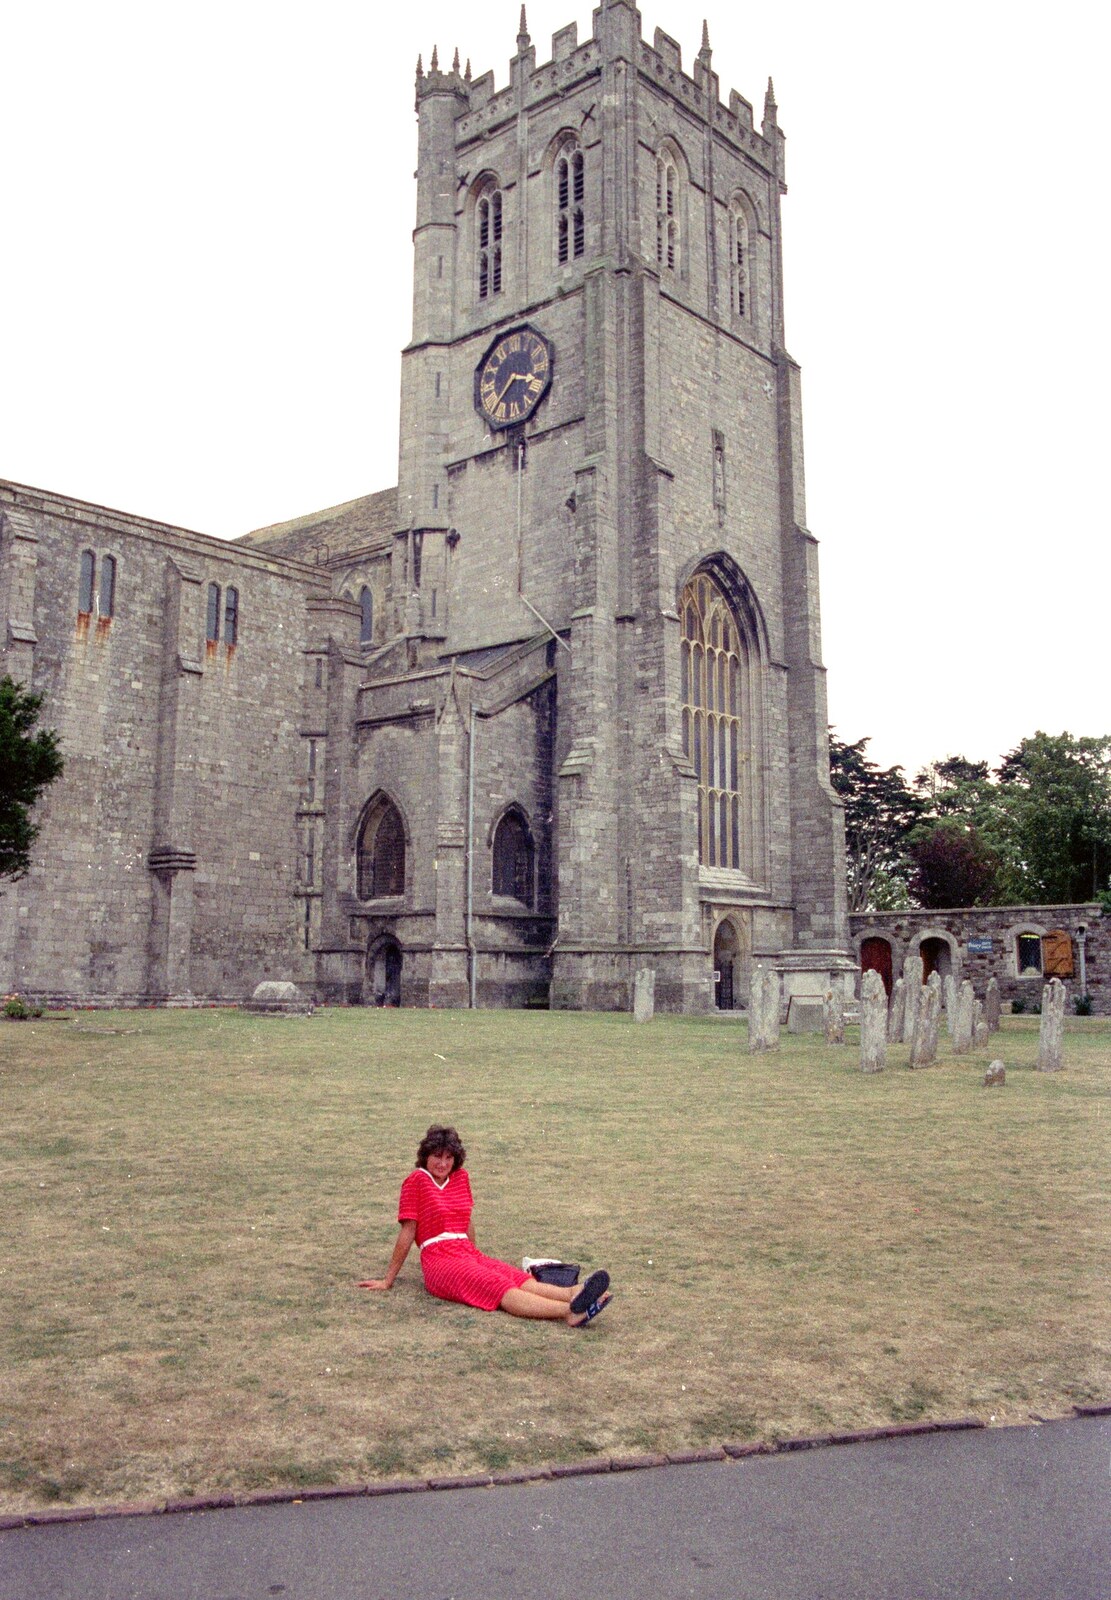 Angela on the lawn in front of Christchurch Priory from Back from Uni: Yarmouth, Alum Bay and Barton-on-sea, Hampshire - 23rd July 1989